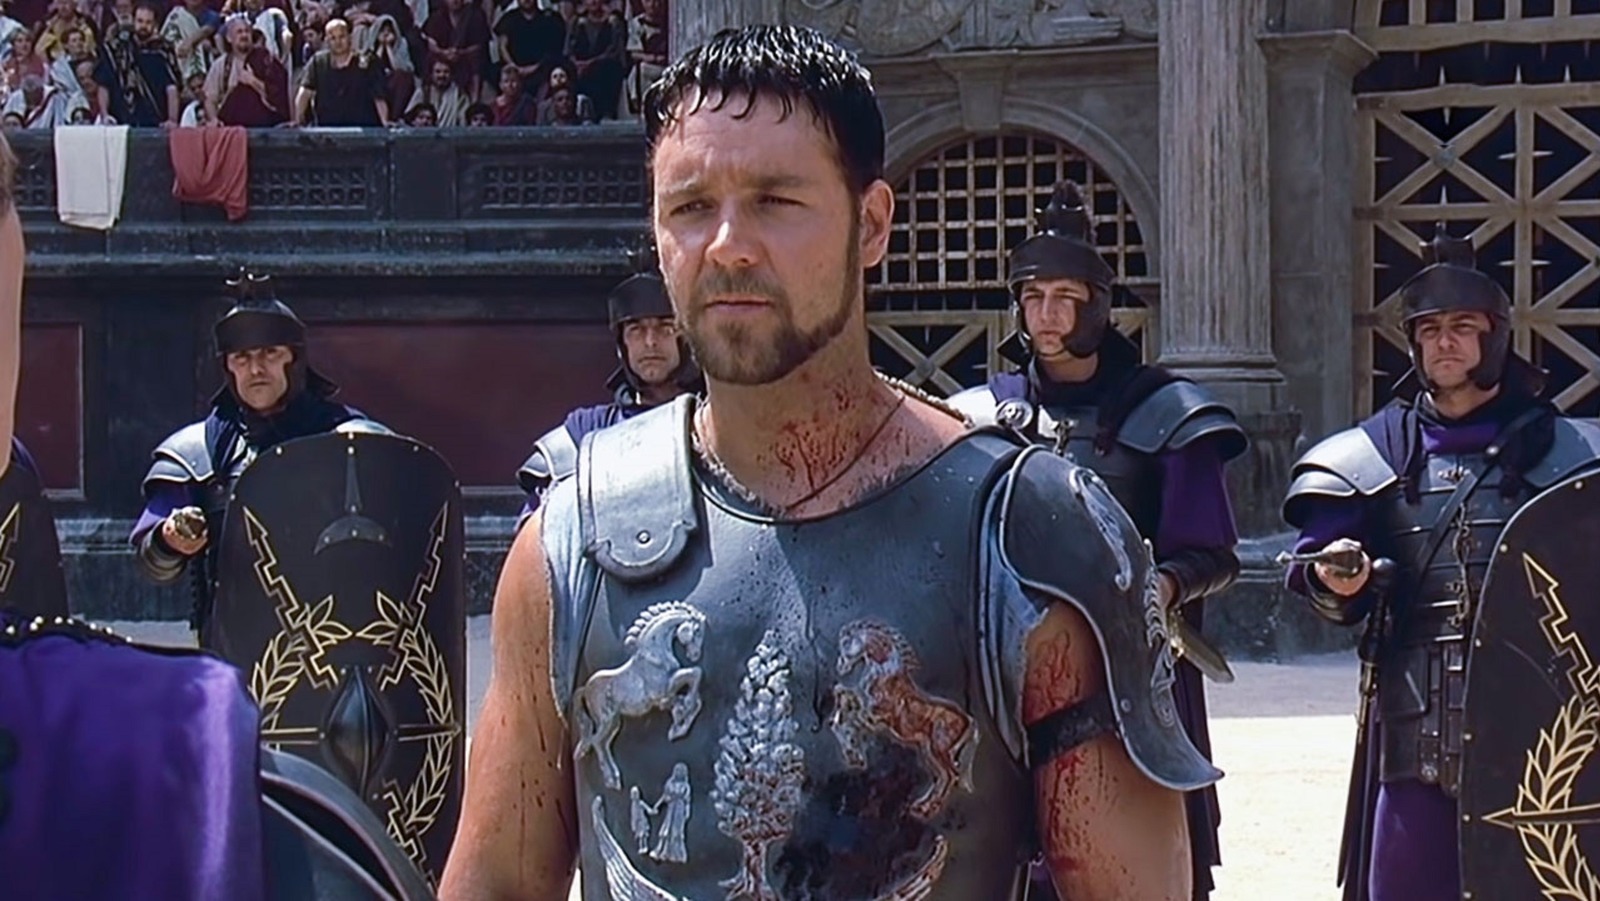 Is Gladiator Based On A True Story?